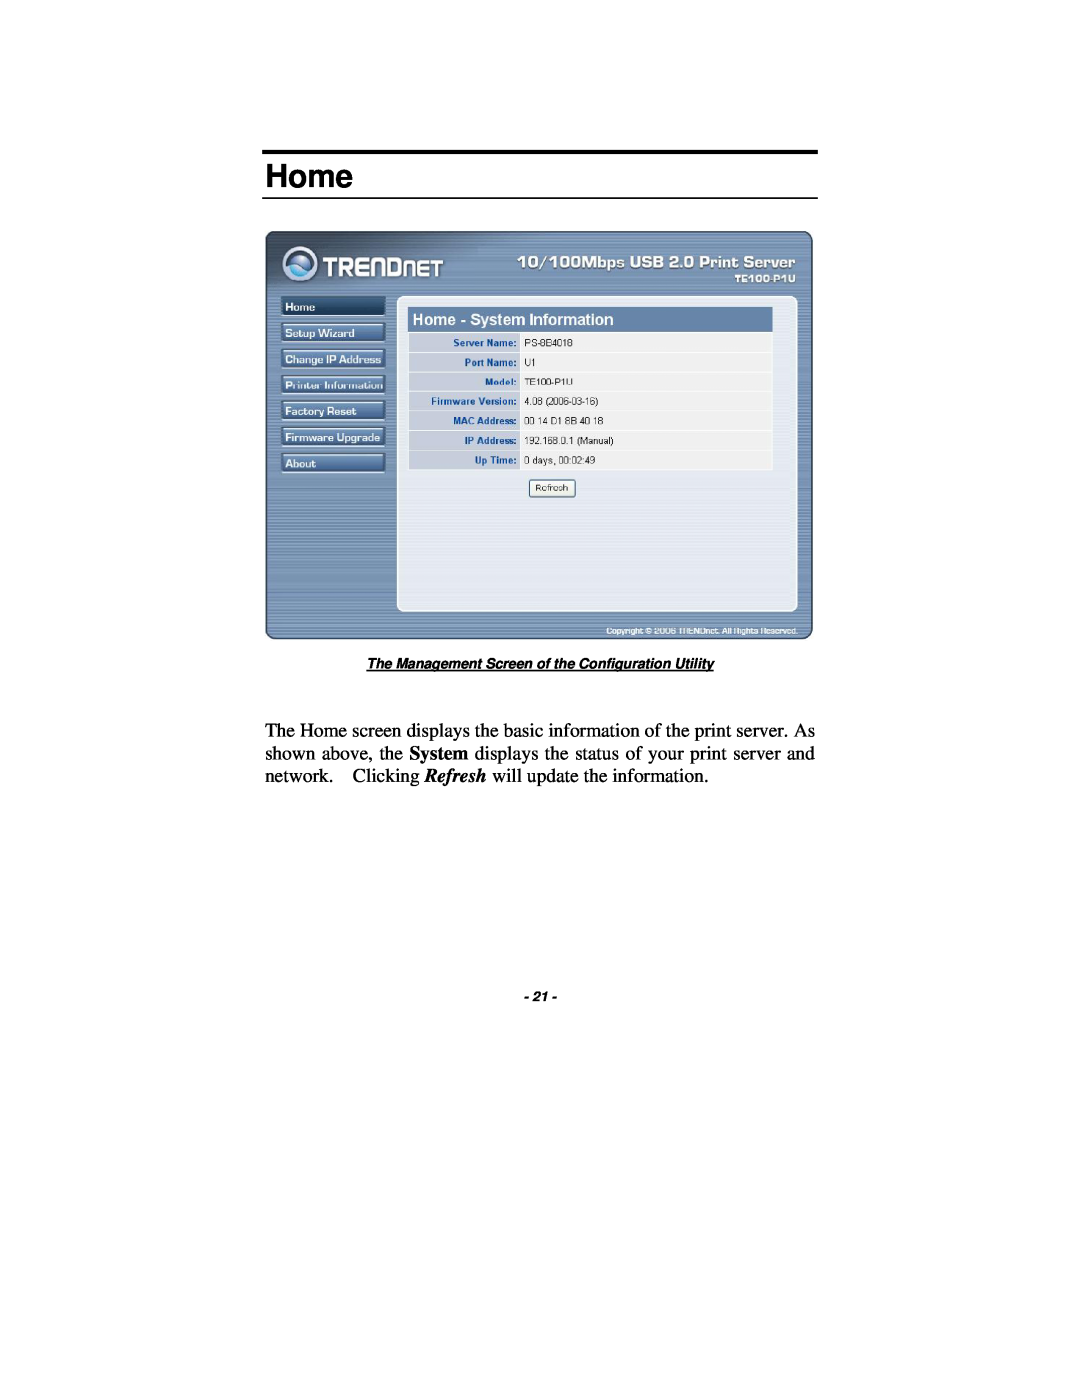 TRENDnet TE100-P1U manual Home, The Management Screen of the Configuration Utility 